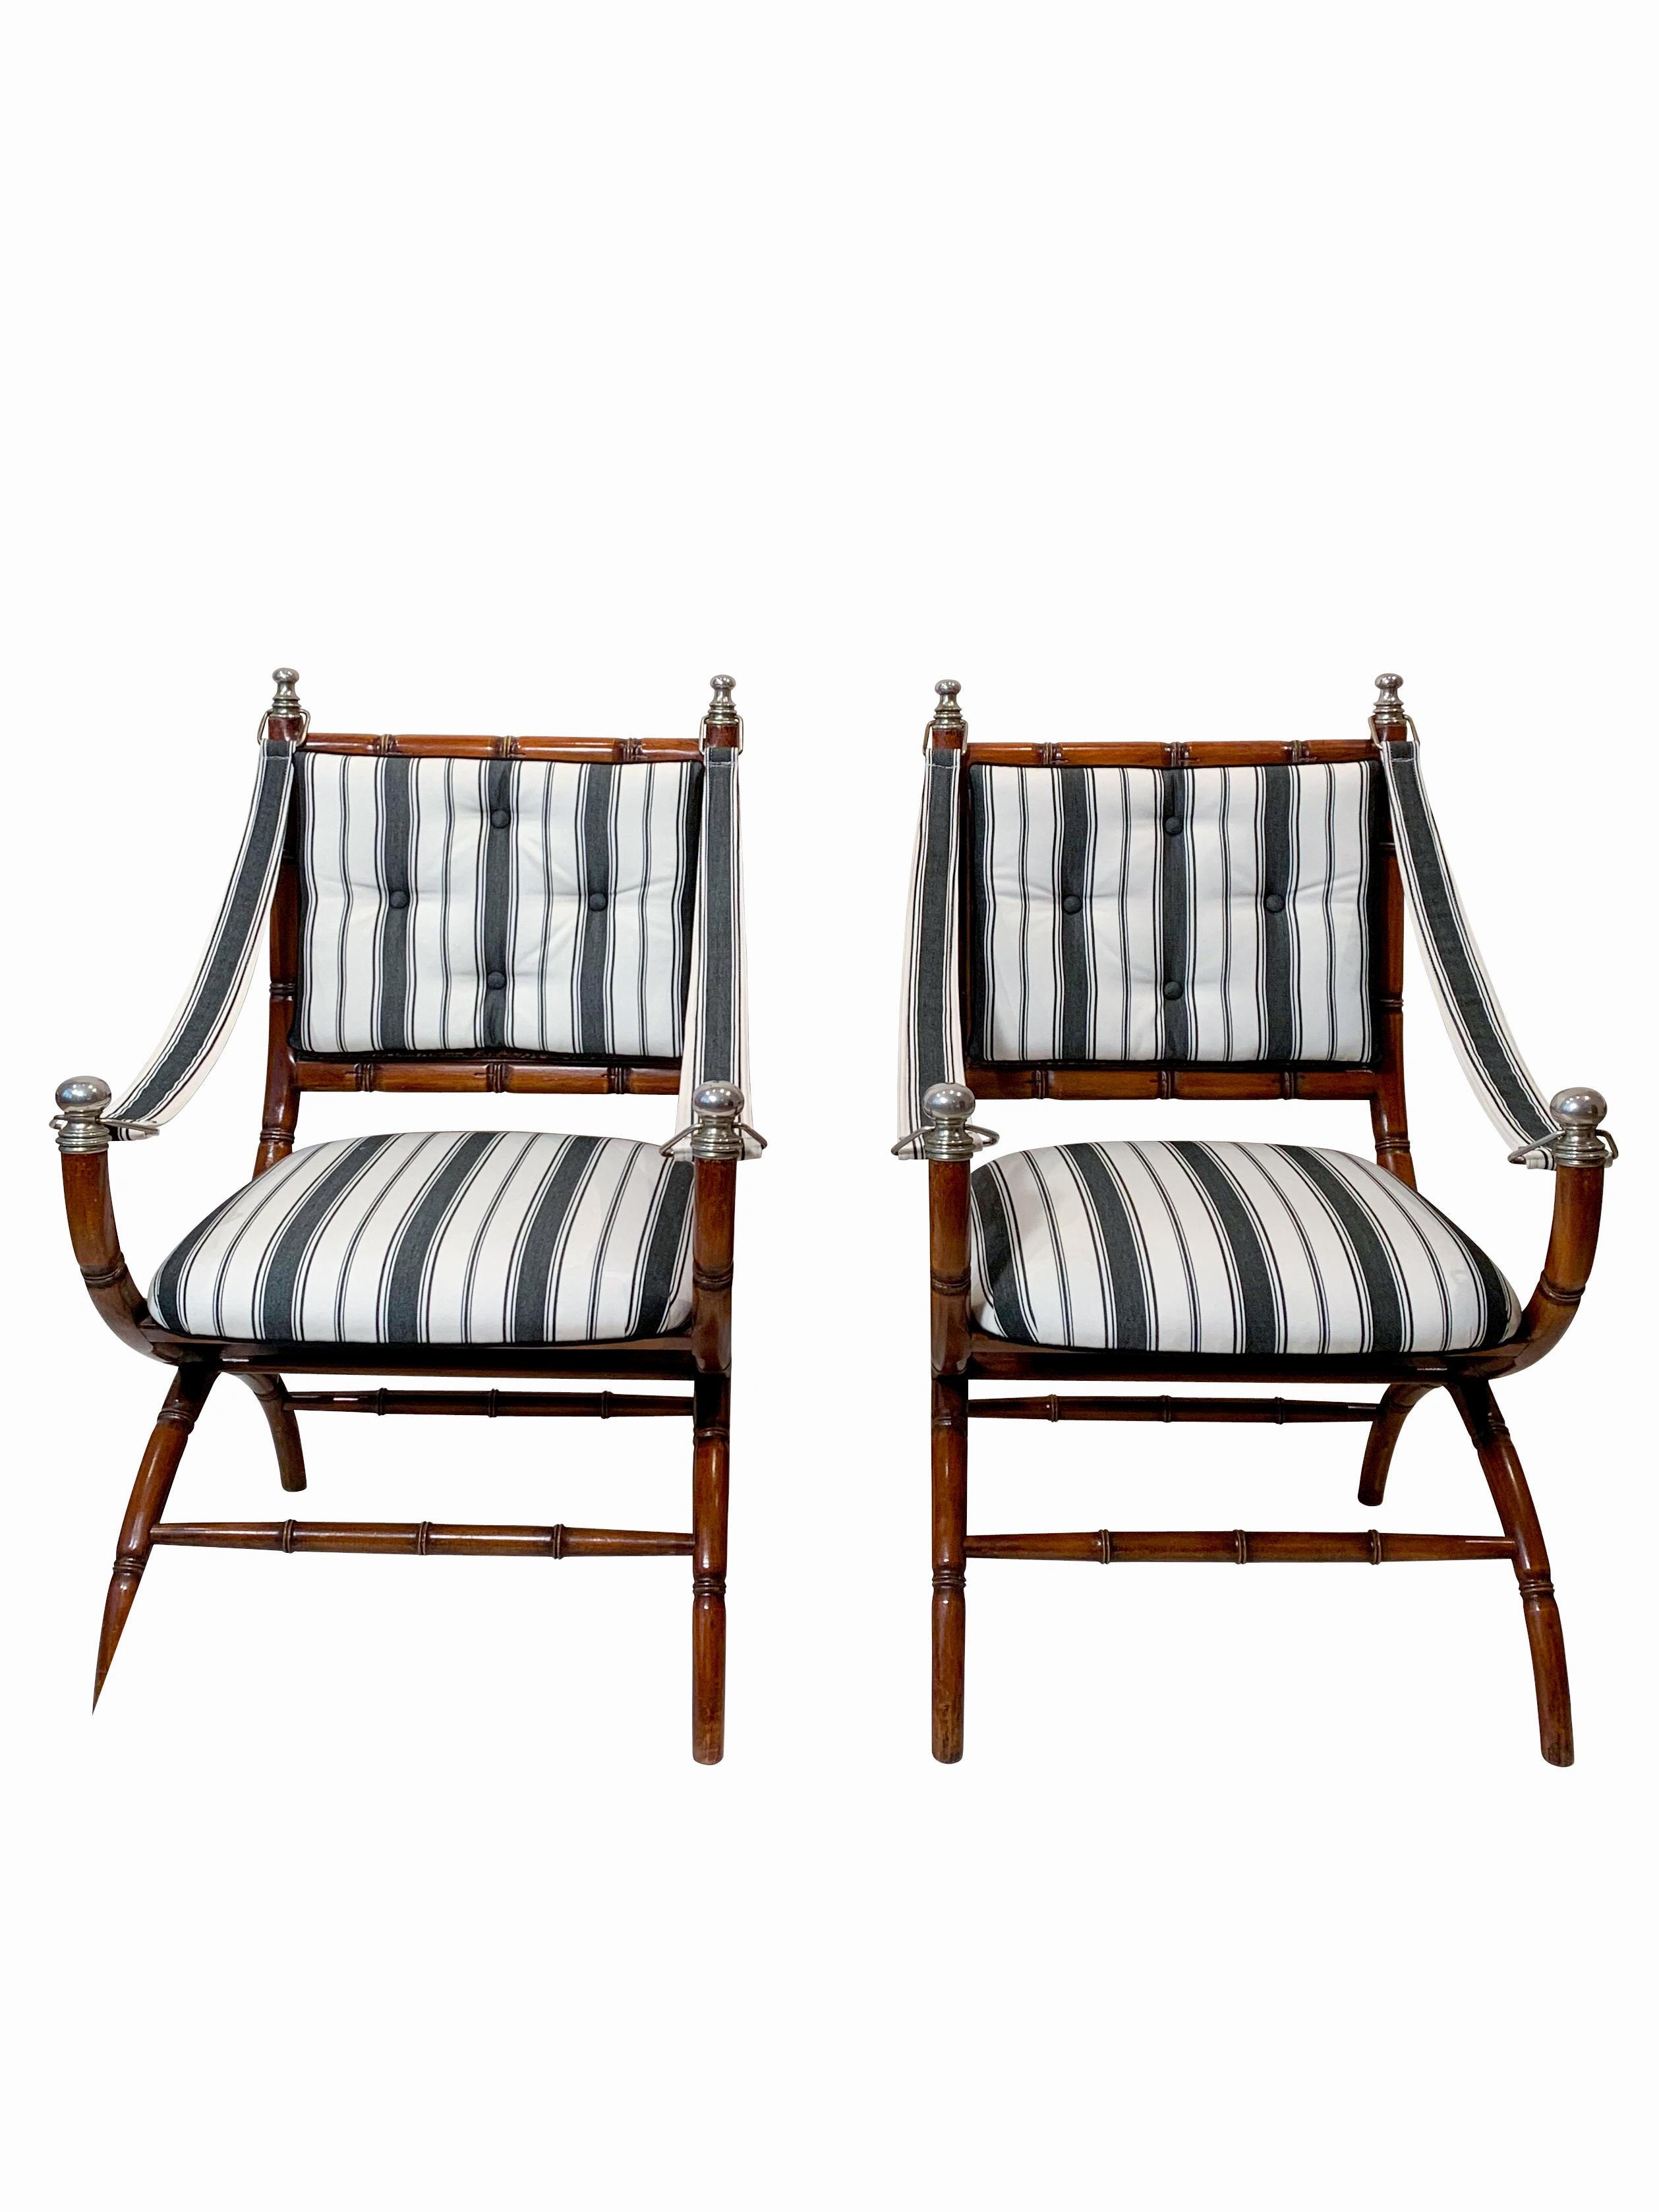 Mid-20th Century Pair of Faux Bamboo Armchairs on Arched Legs, attributed to Maison Jansen 